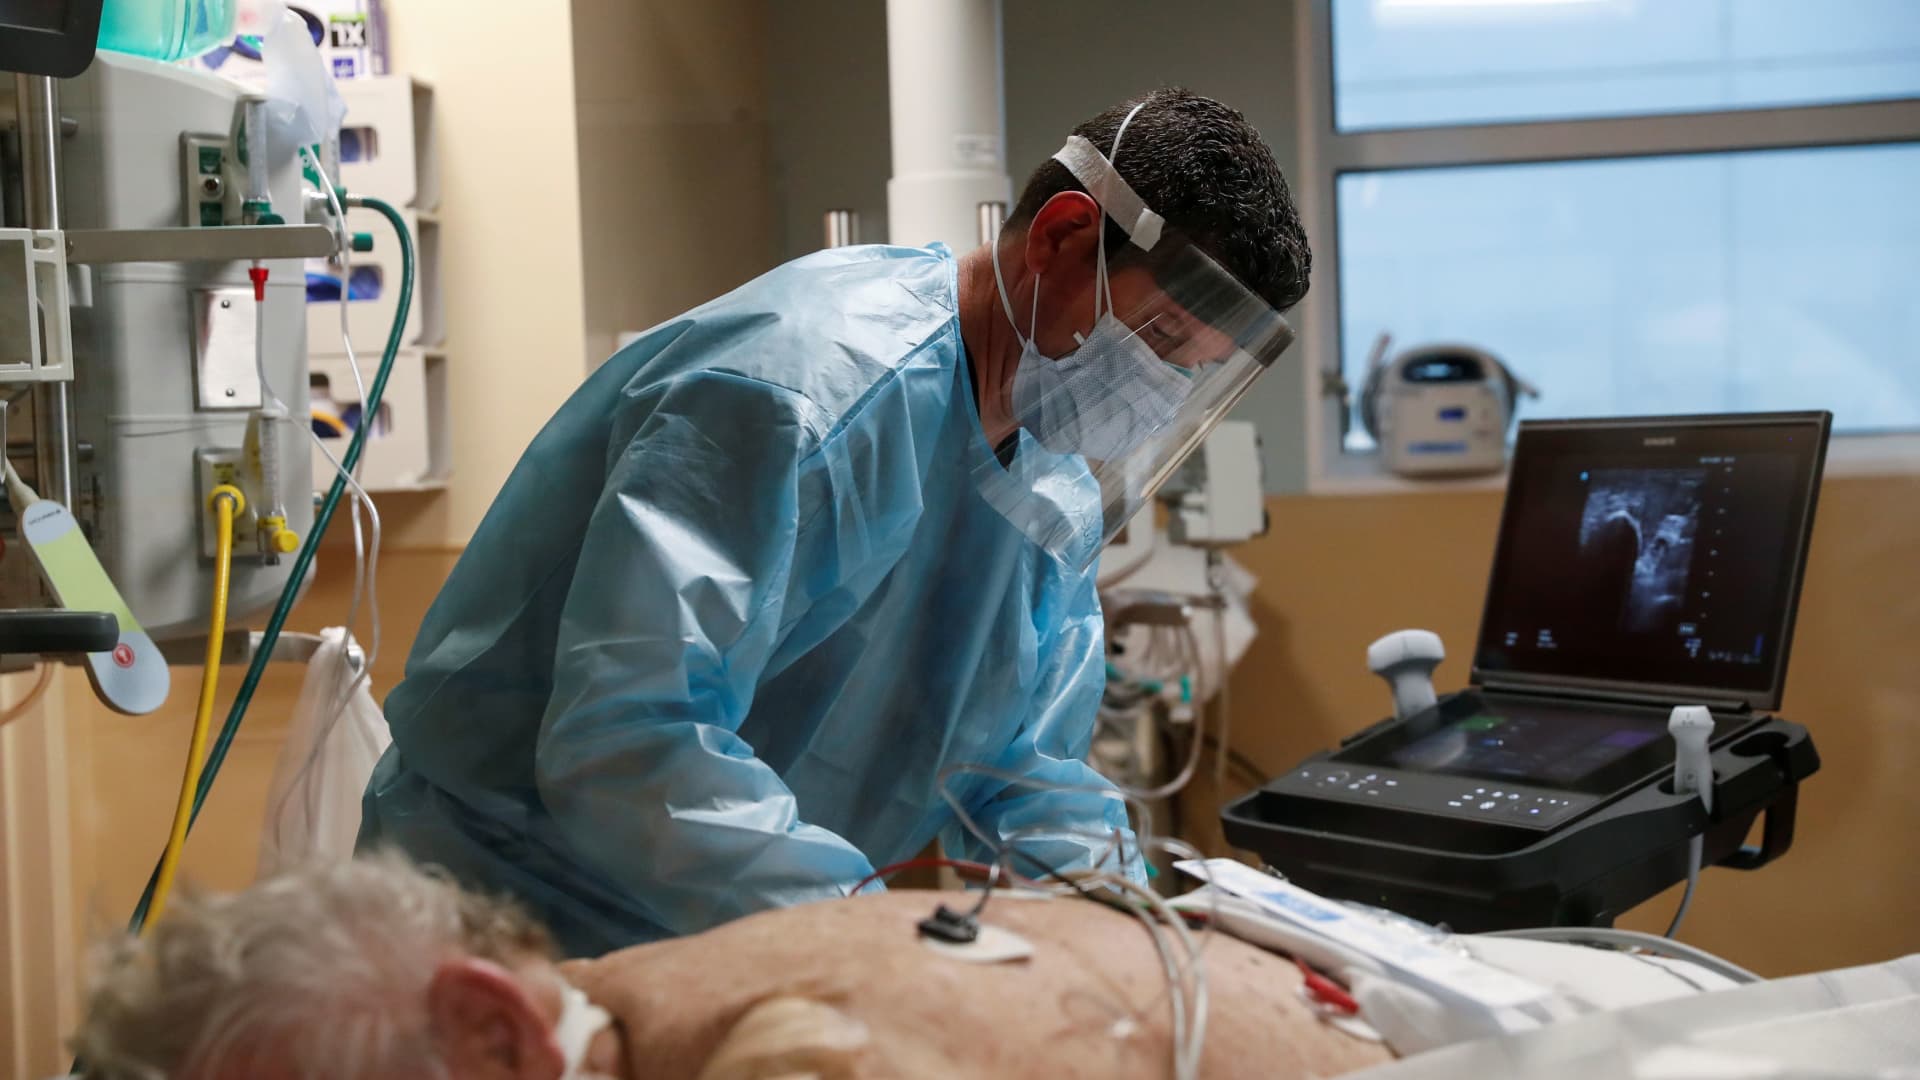 A critical care respiratory therapist works with a coronavirus disease (COVID-19) positive patient in the intensive care unit (ICU) at Sarasota Memorial Hospital in Sarasota, Florida, February 11, 2021.